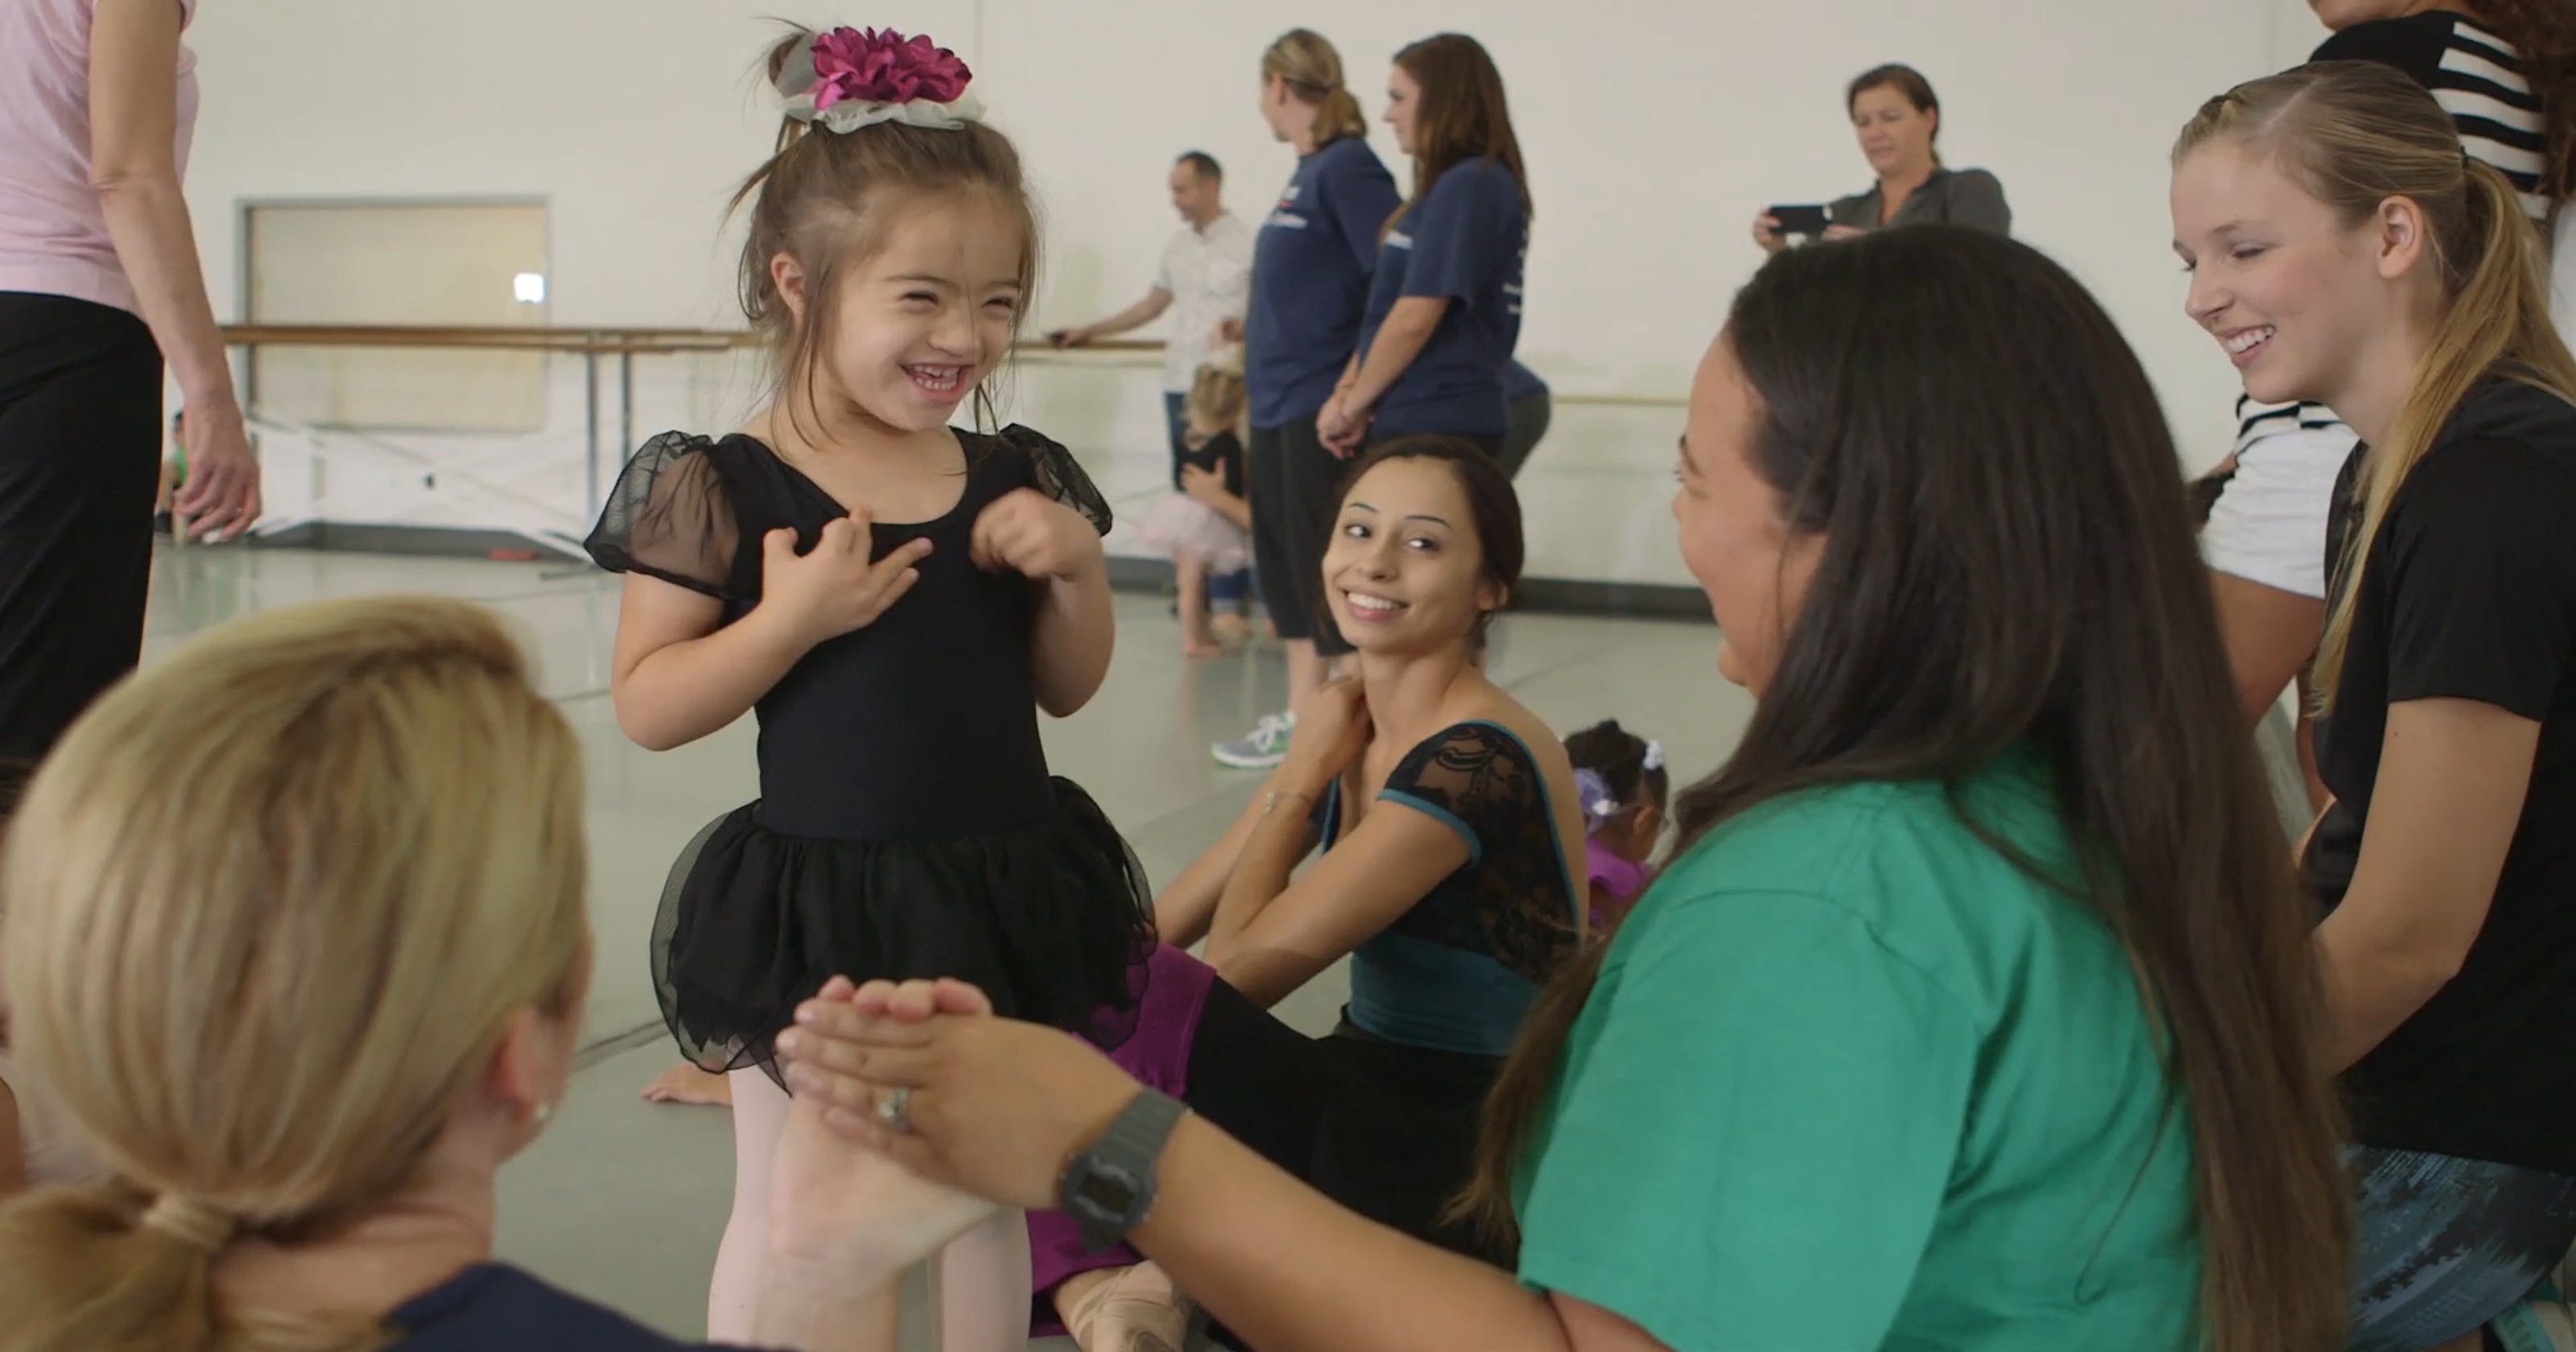 Girls With Disabilities Are Dancing Like Ballerinas For The First Time